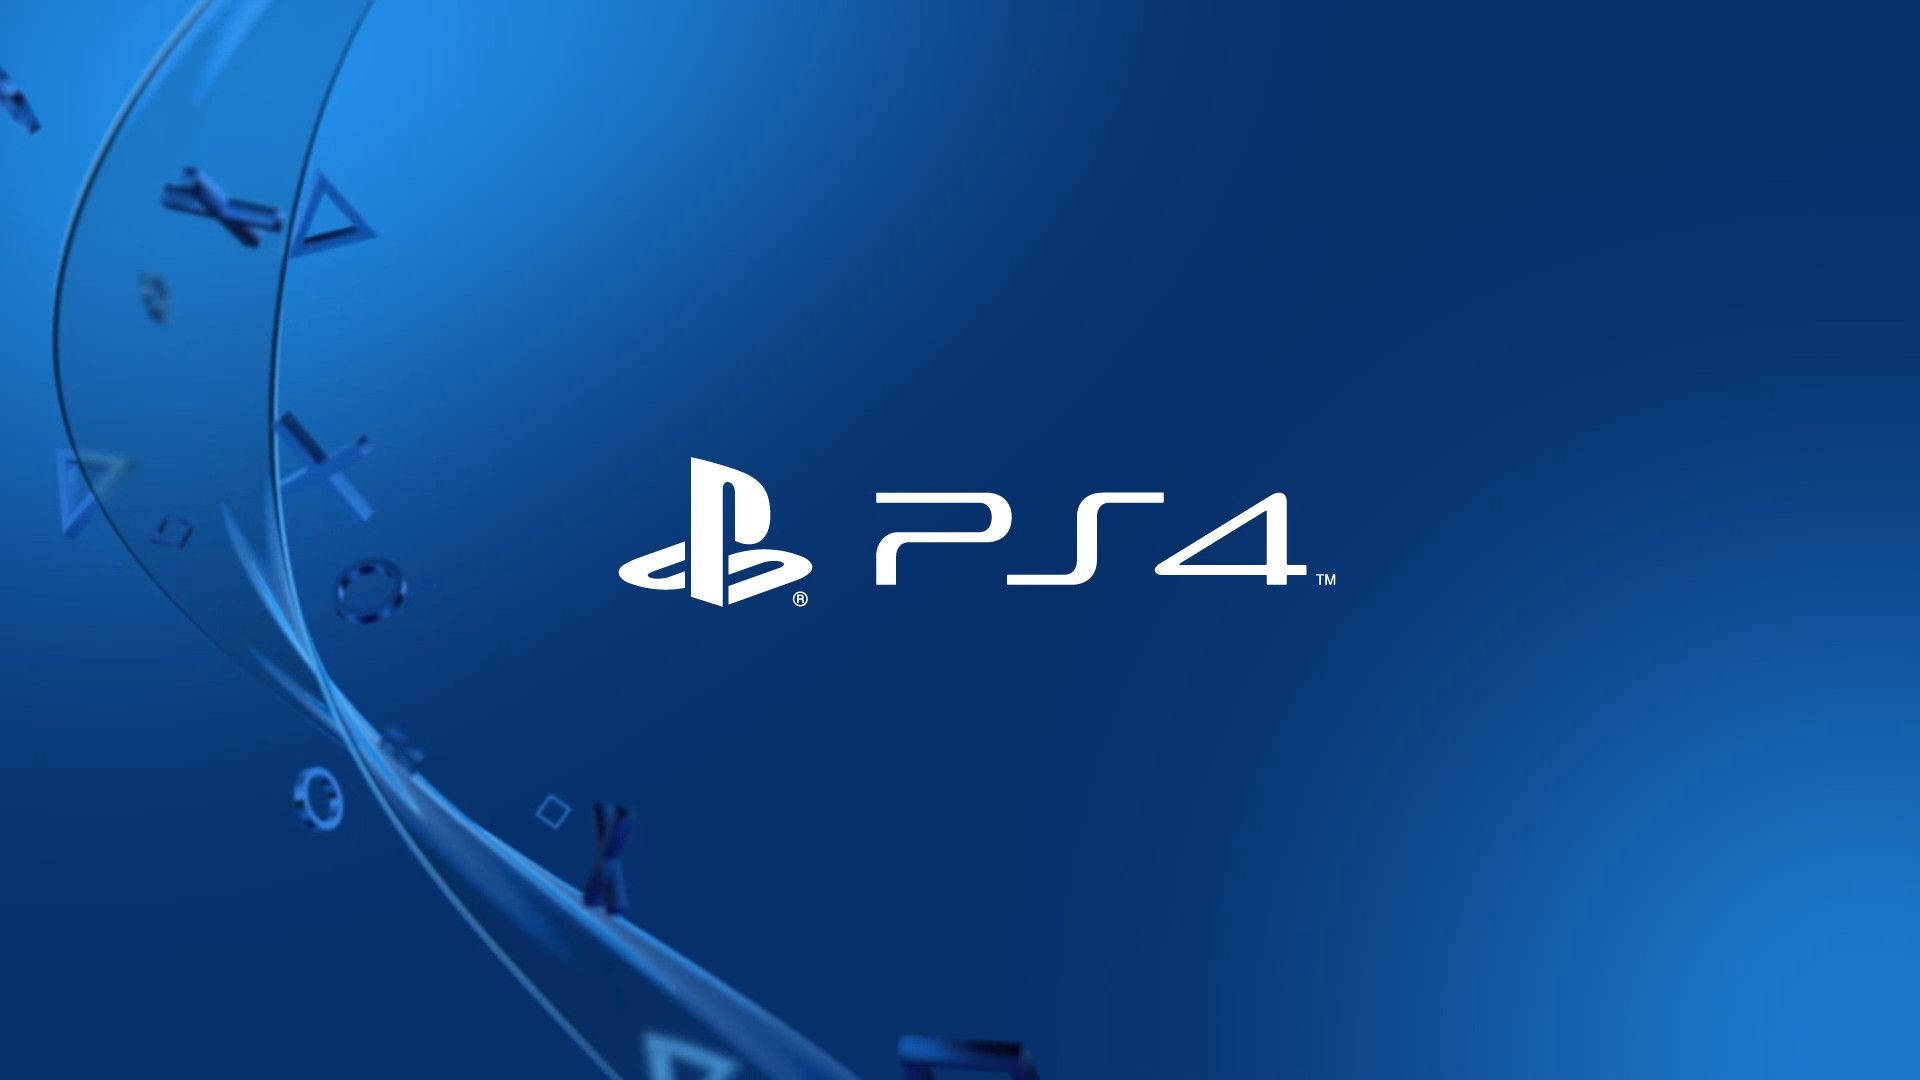 120 Ps4 Wallpapers & Backgrounds For